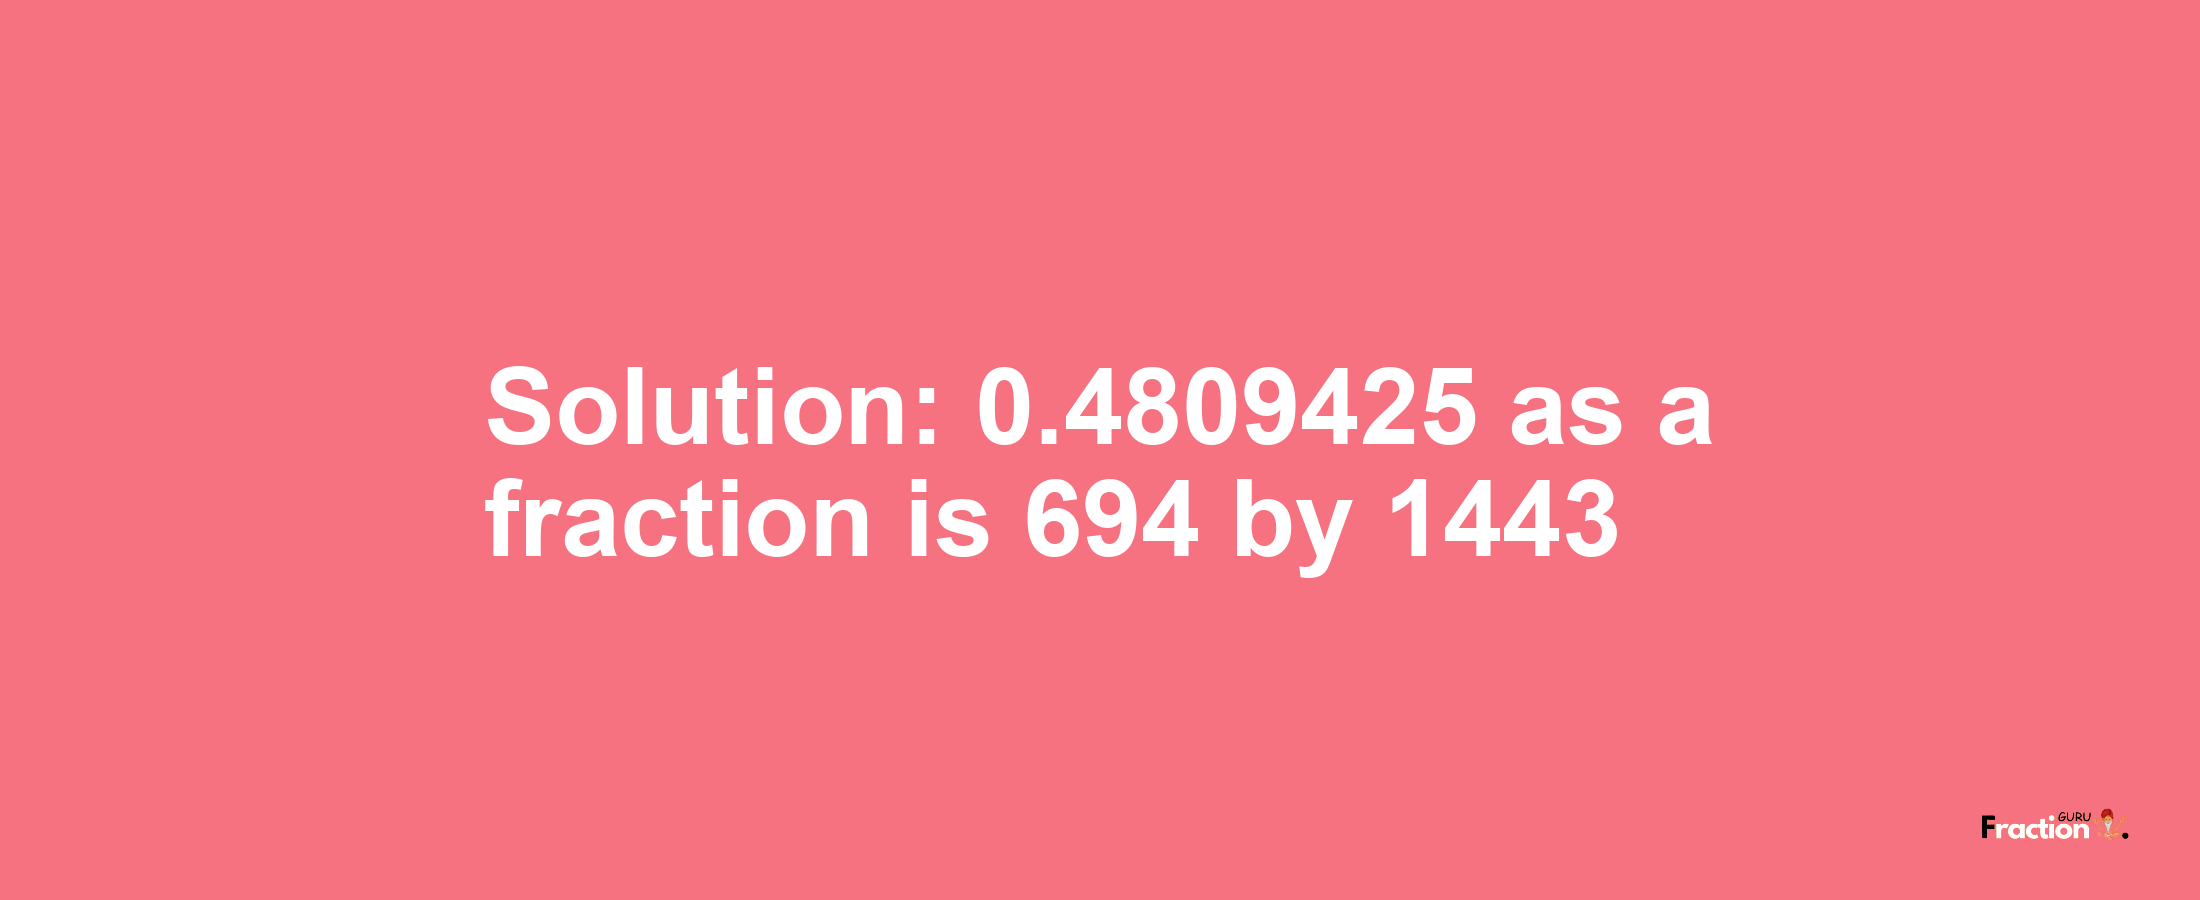 Solution:0.4809425 as a fraction is 694/1443